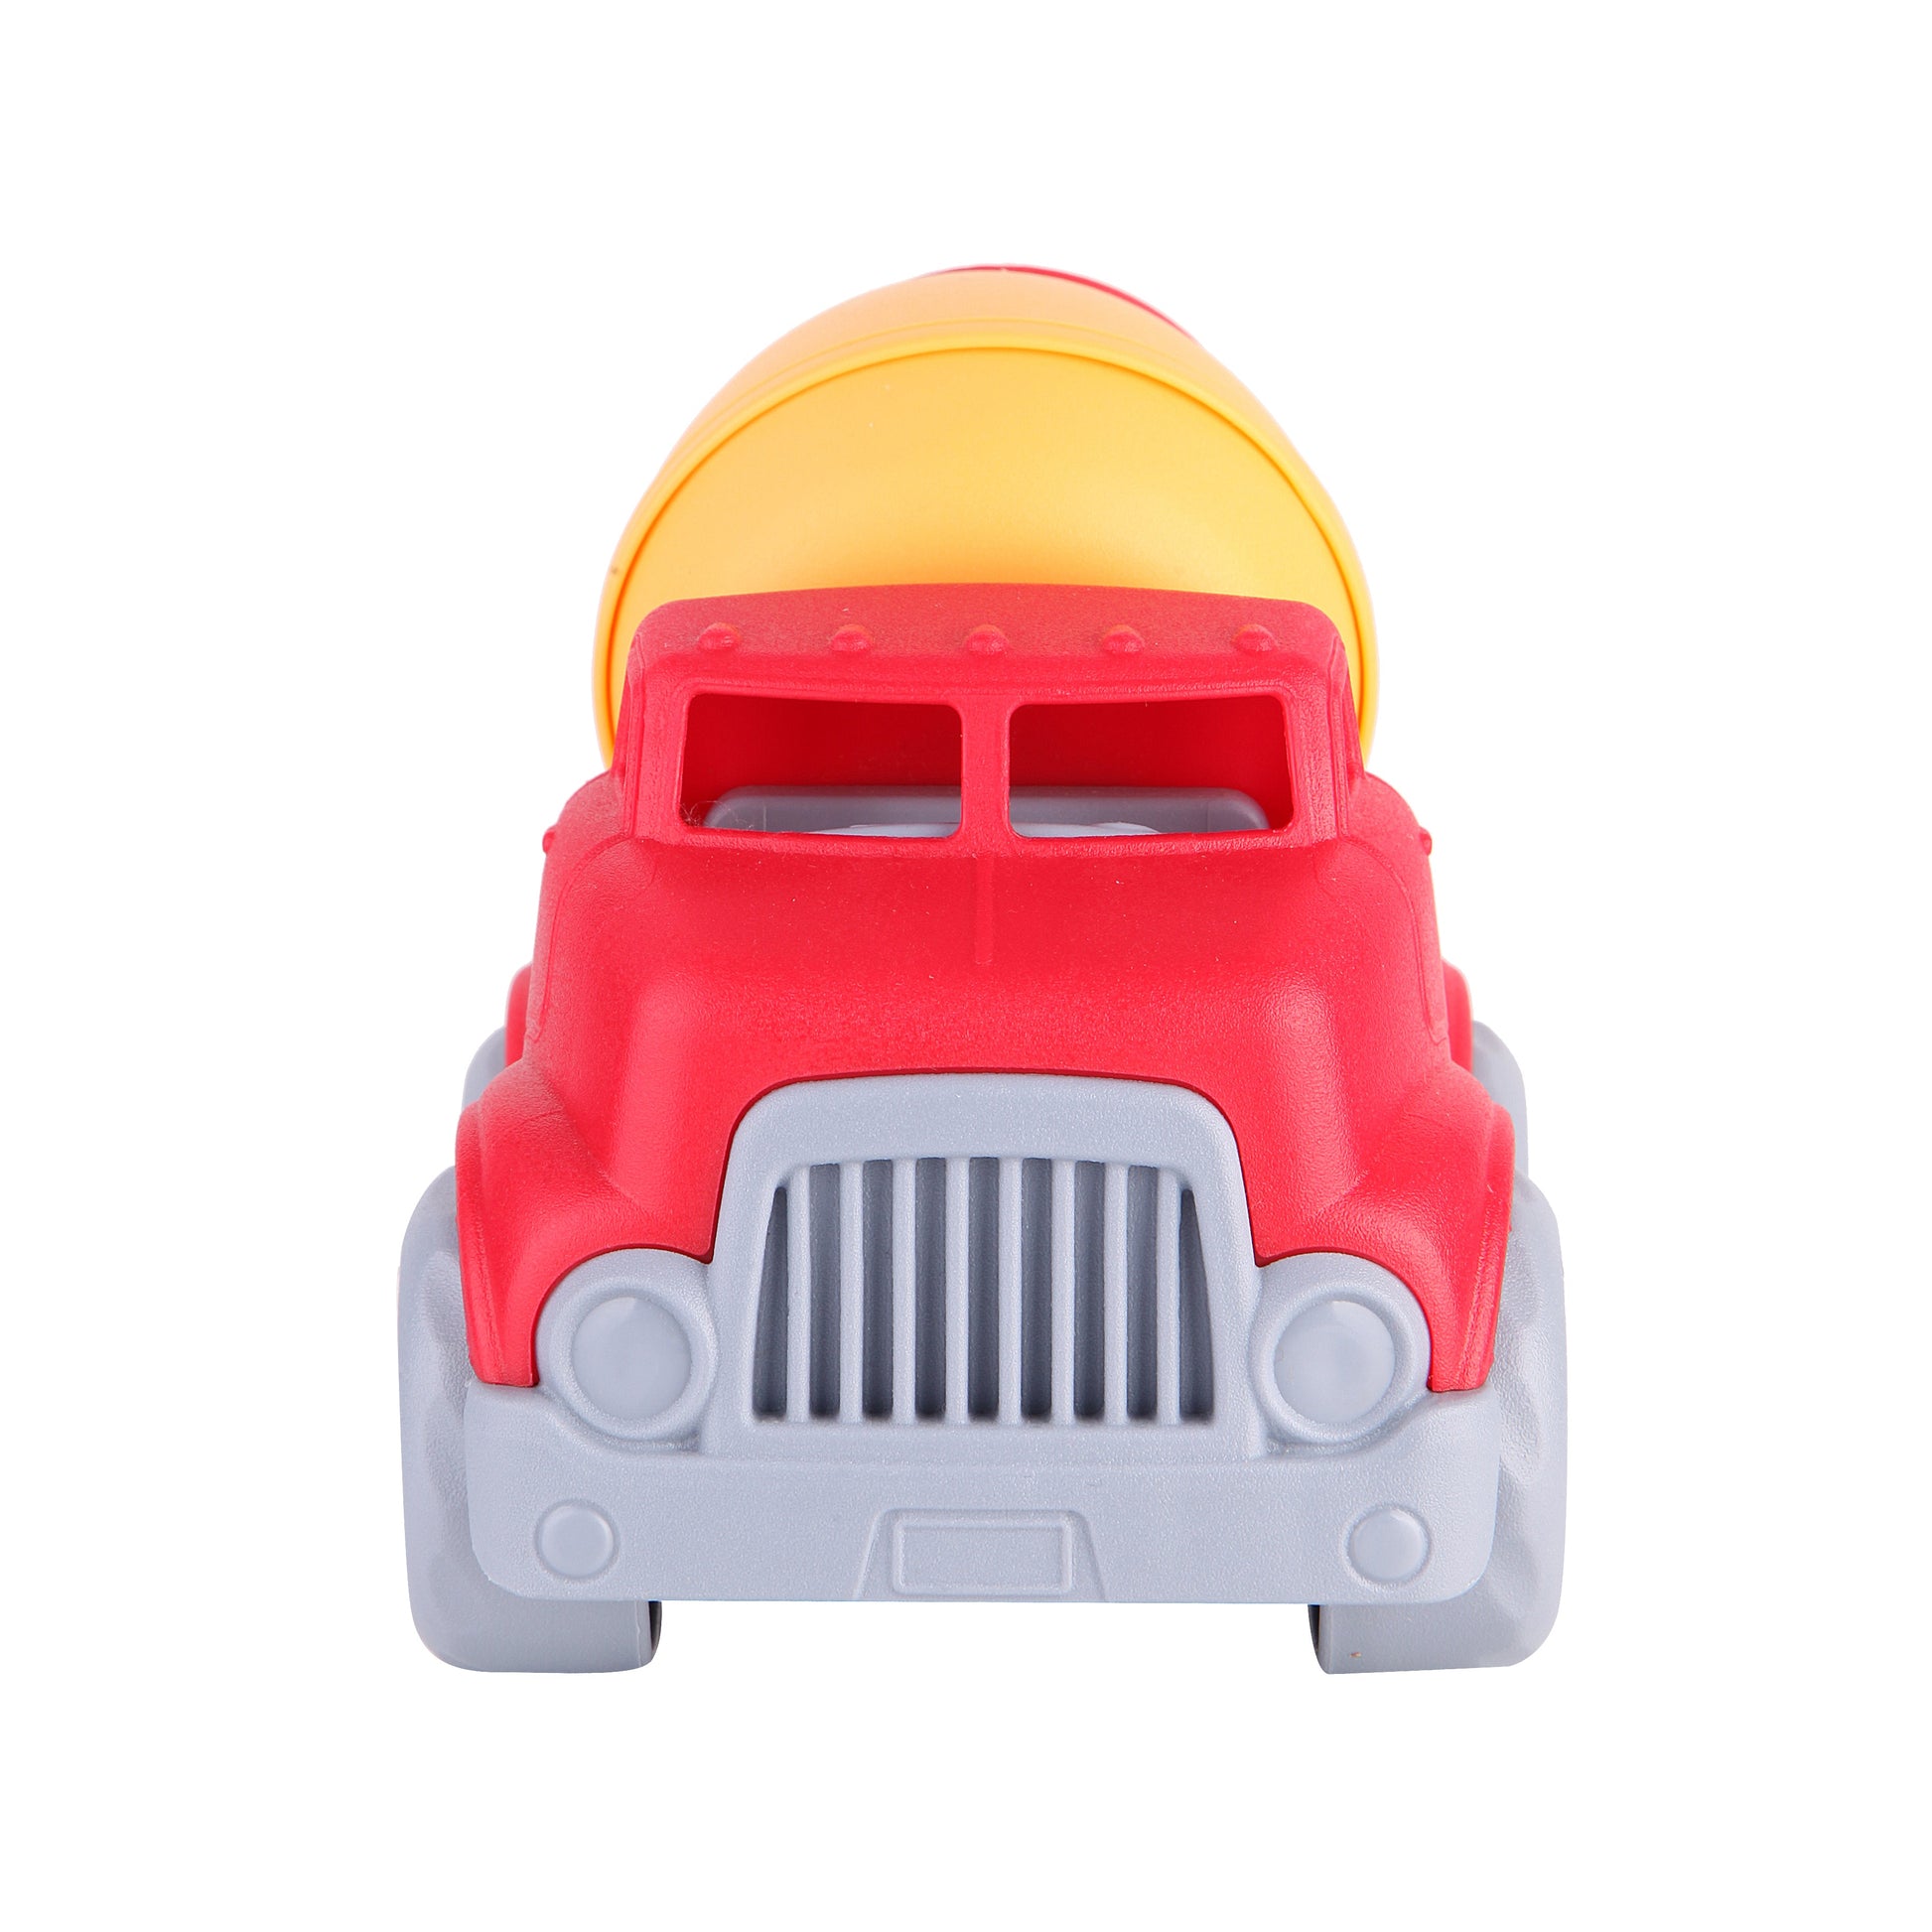 Red Mini Mixer Truck-Car, catveh, Communication, Construction, Coordination, Imagination, Language, Mixer, Motor, Pretend, Red, Skills, Toy, Truck, Wheels-Let's Be Child-[Too Twee]-[Tootwee]-[baby]-[newborn]-[clothes]-[essentials]-[toys]-[Lebanon]